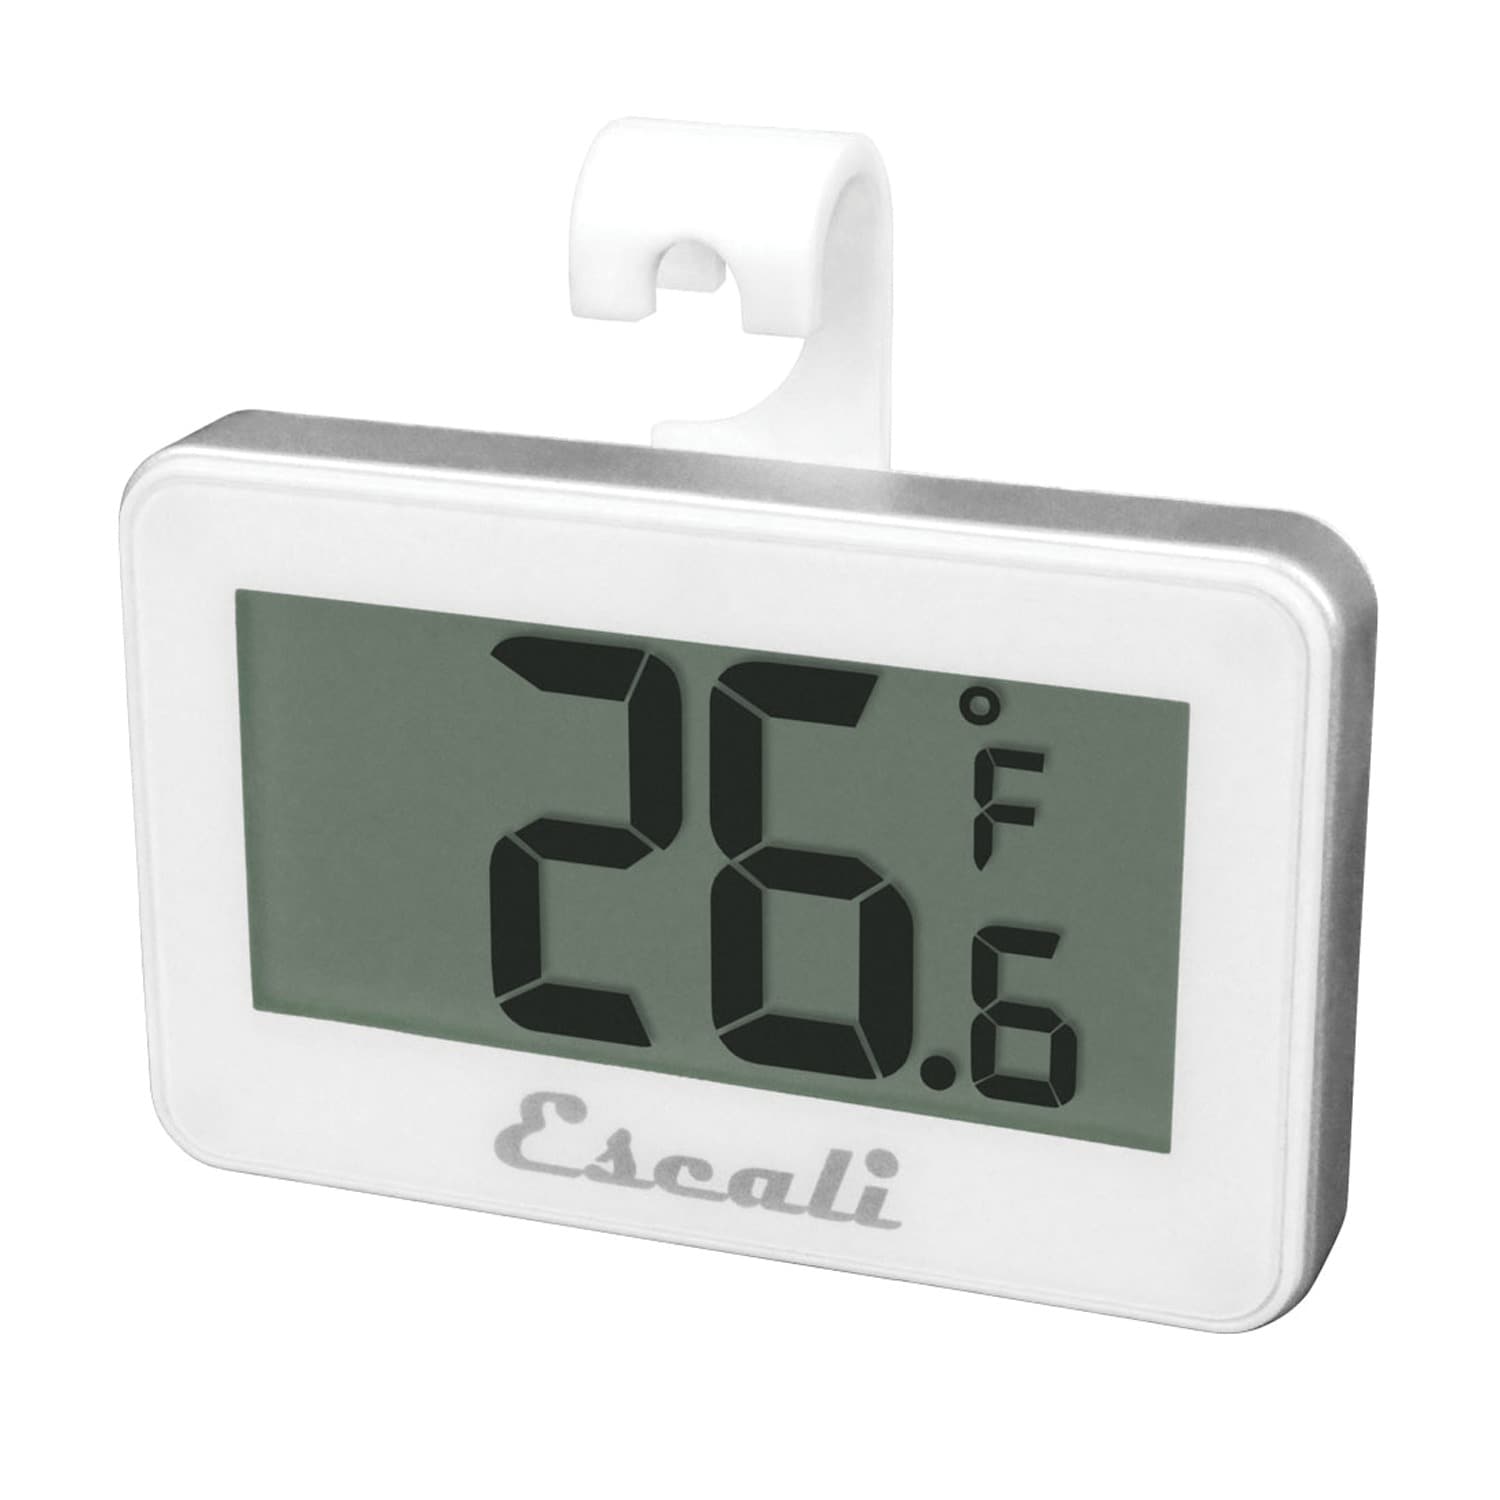 hot selling digital freezer thermometer with